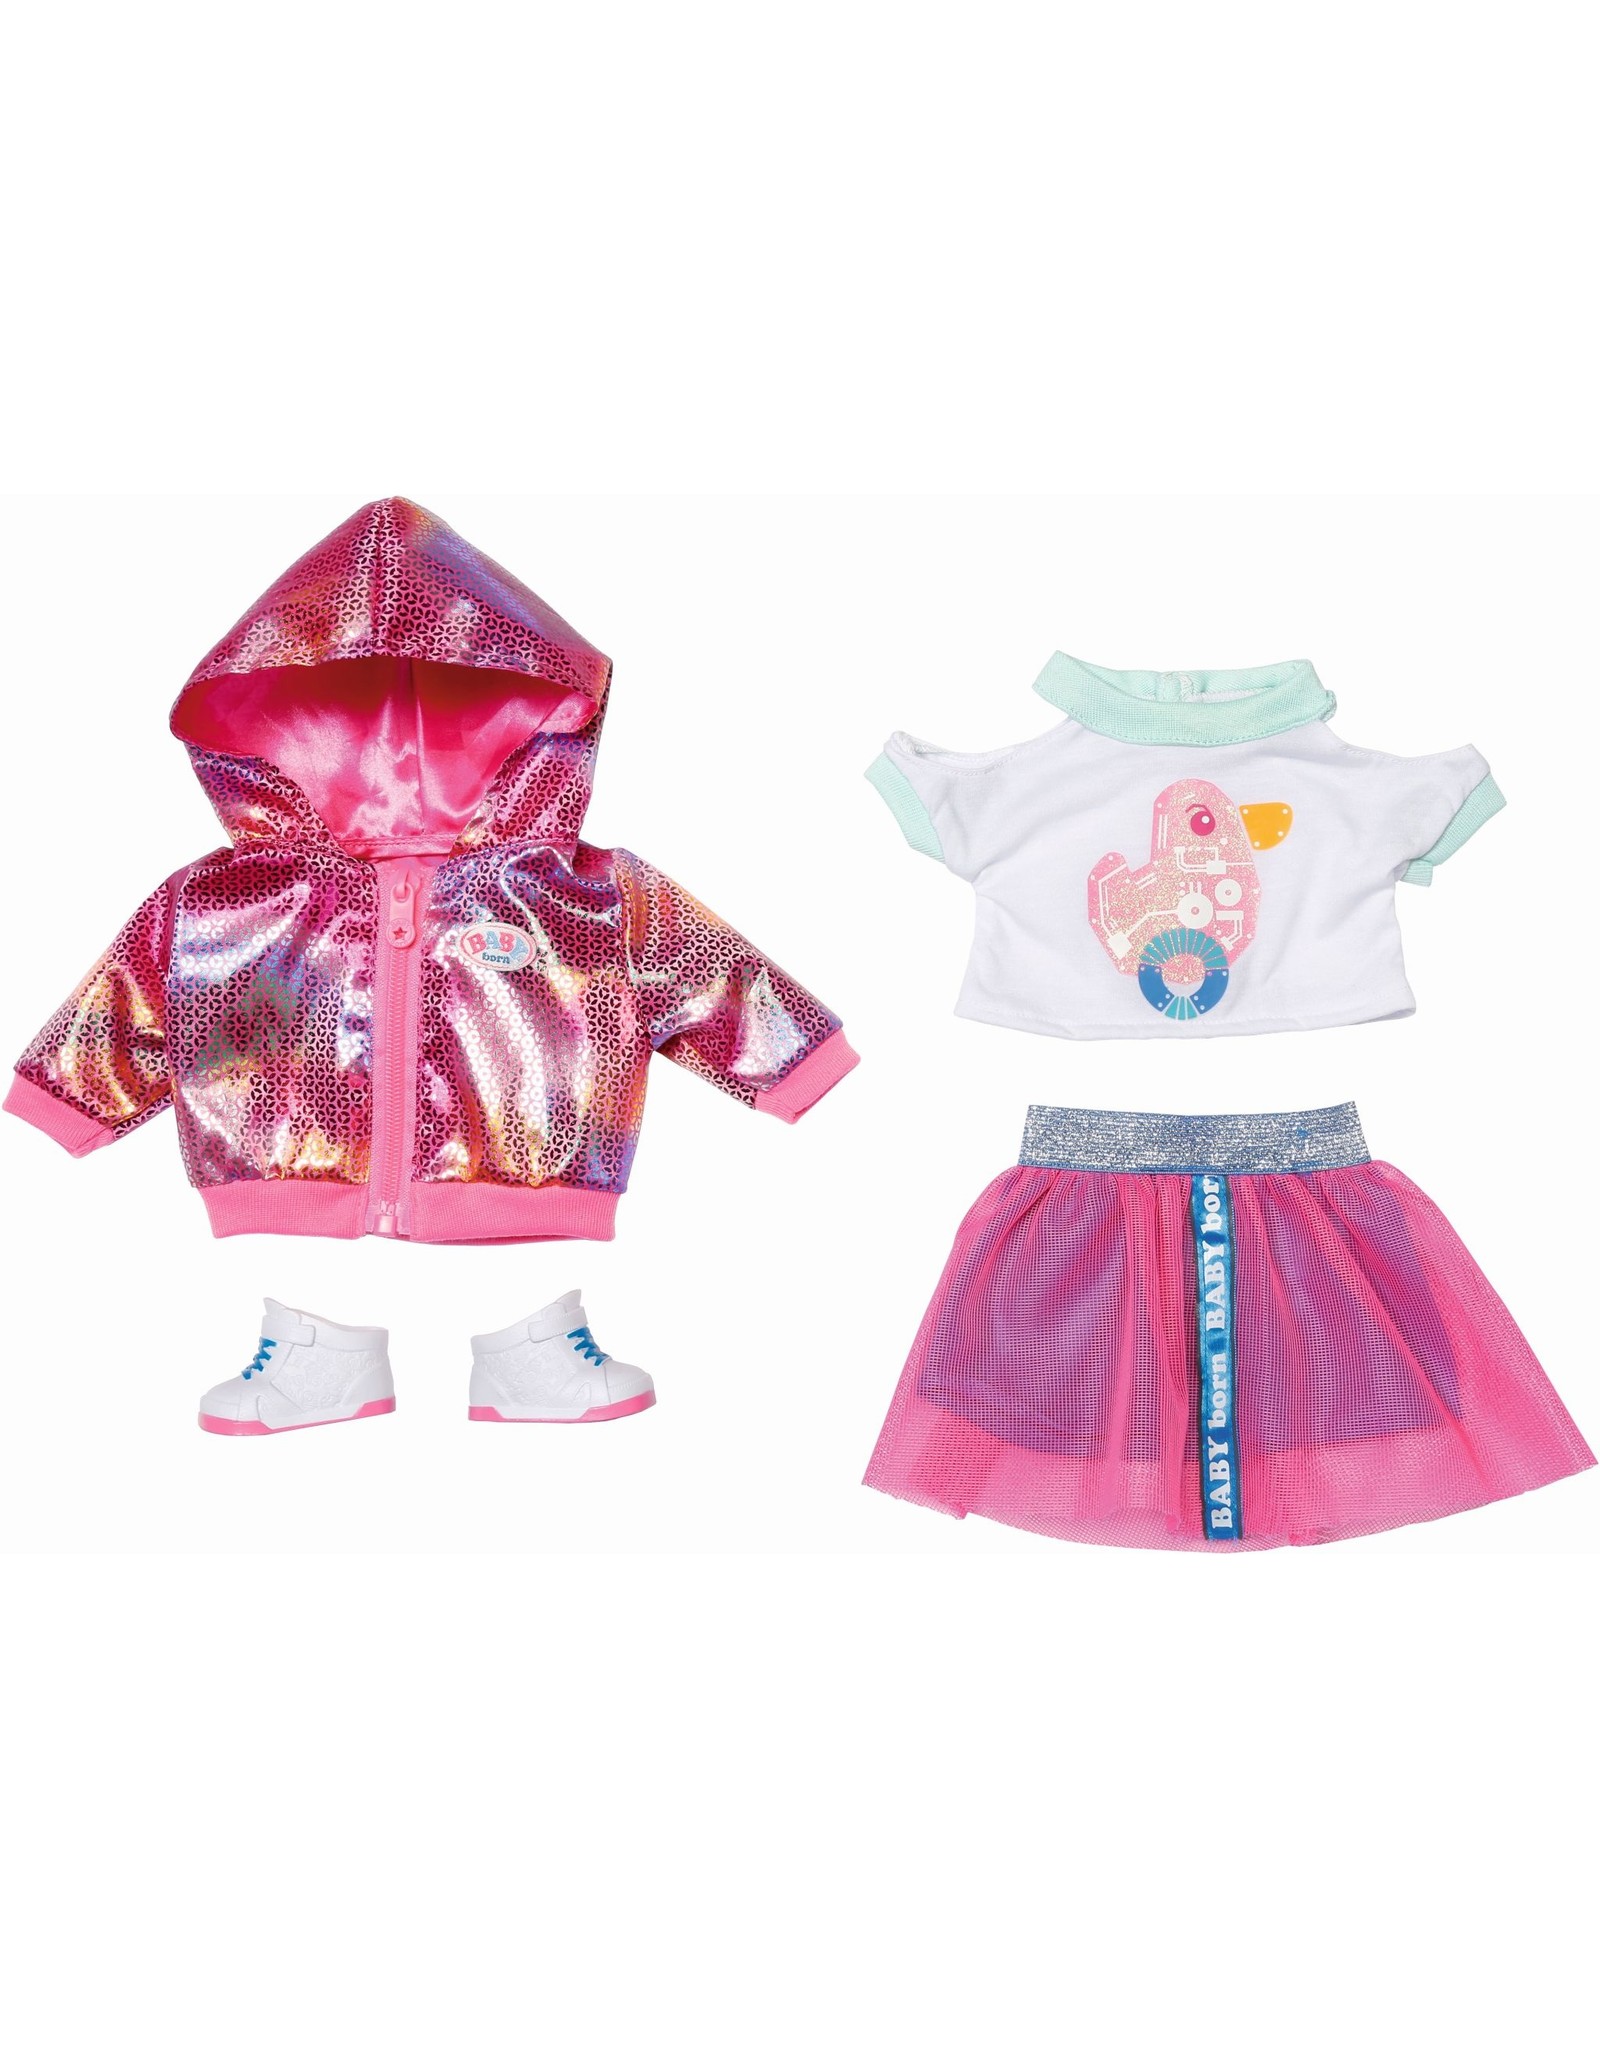 Zapf Creation Baby Born City Deluxe Trendsetter Outfit 